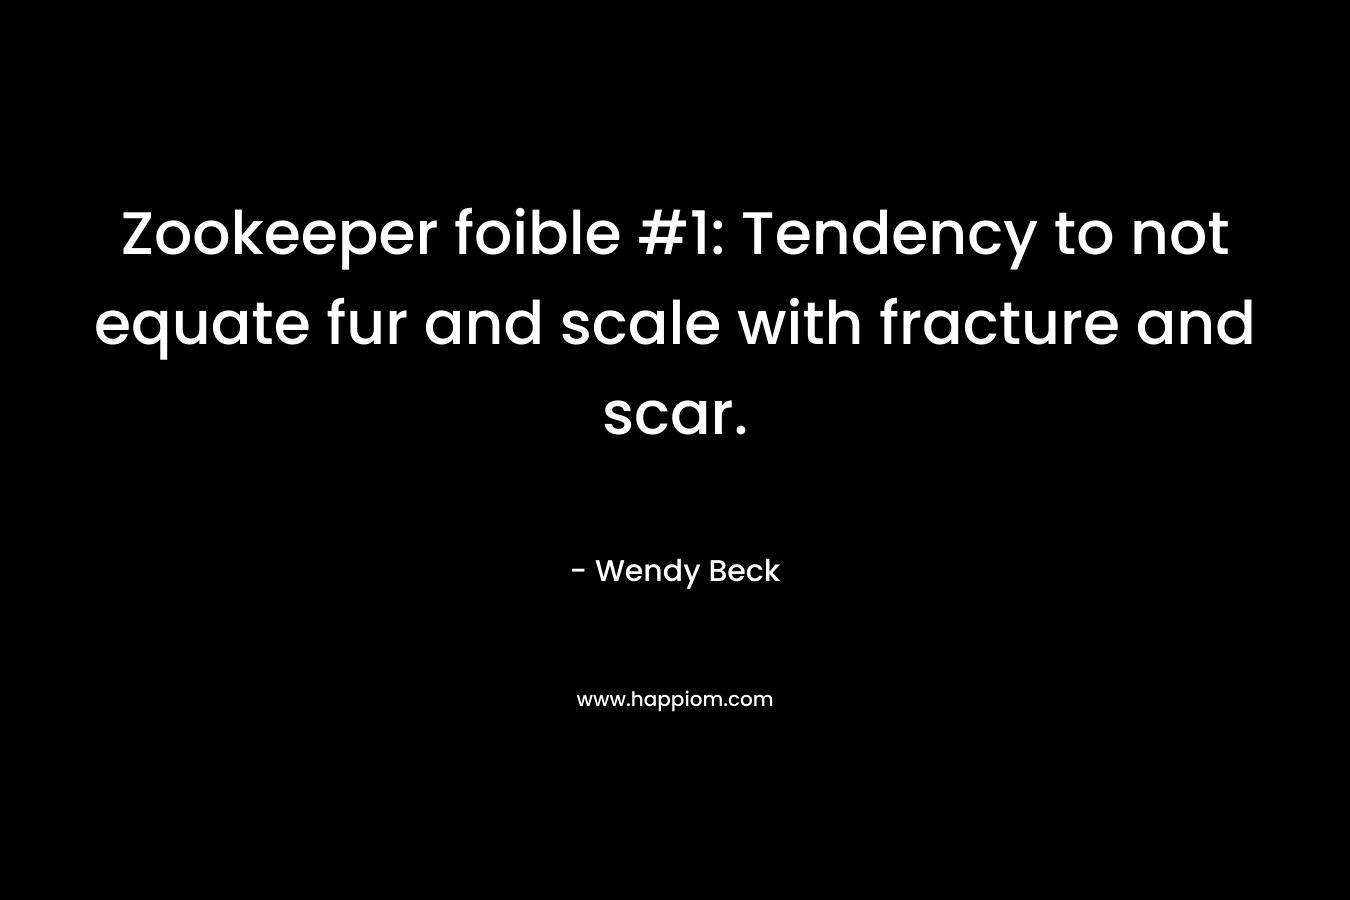 Zookeeper foible #1: Tendency to not equate fur and scale with fracture and scar. – Wendy Beck